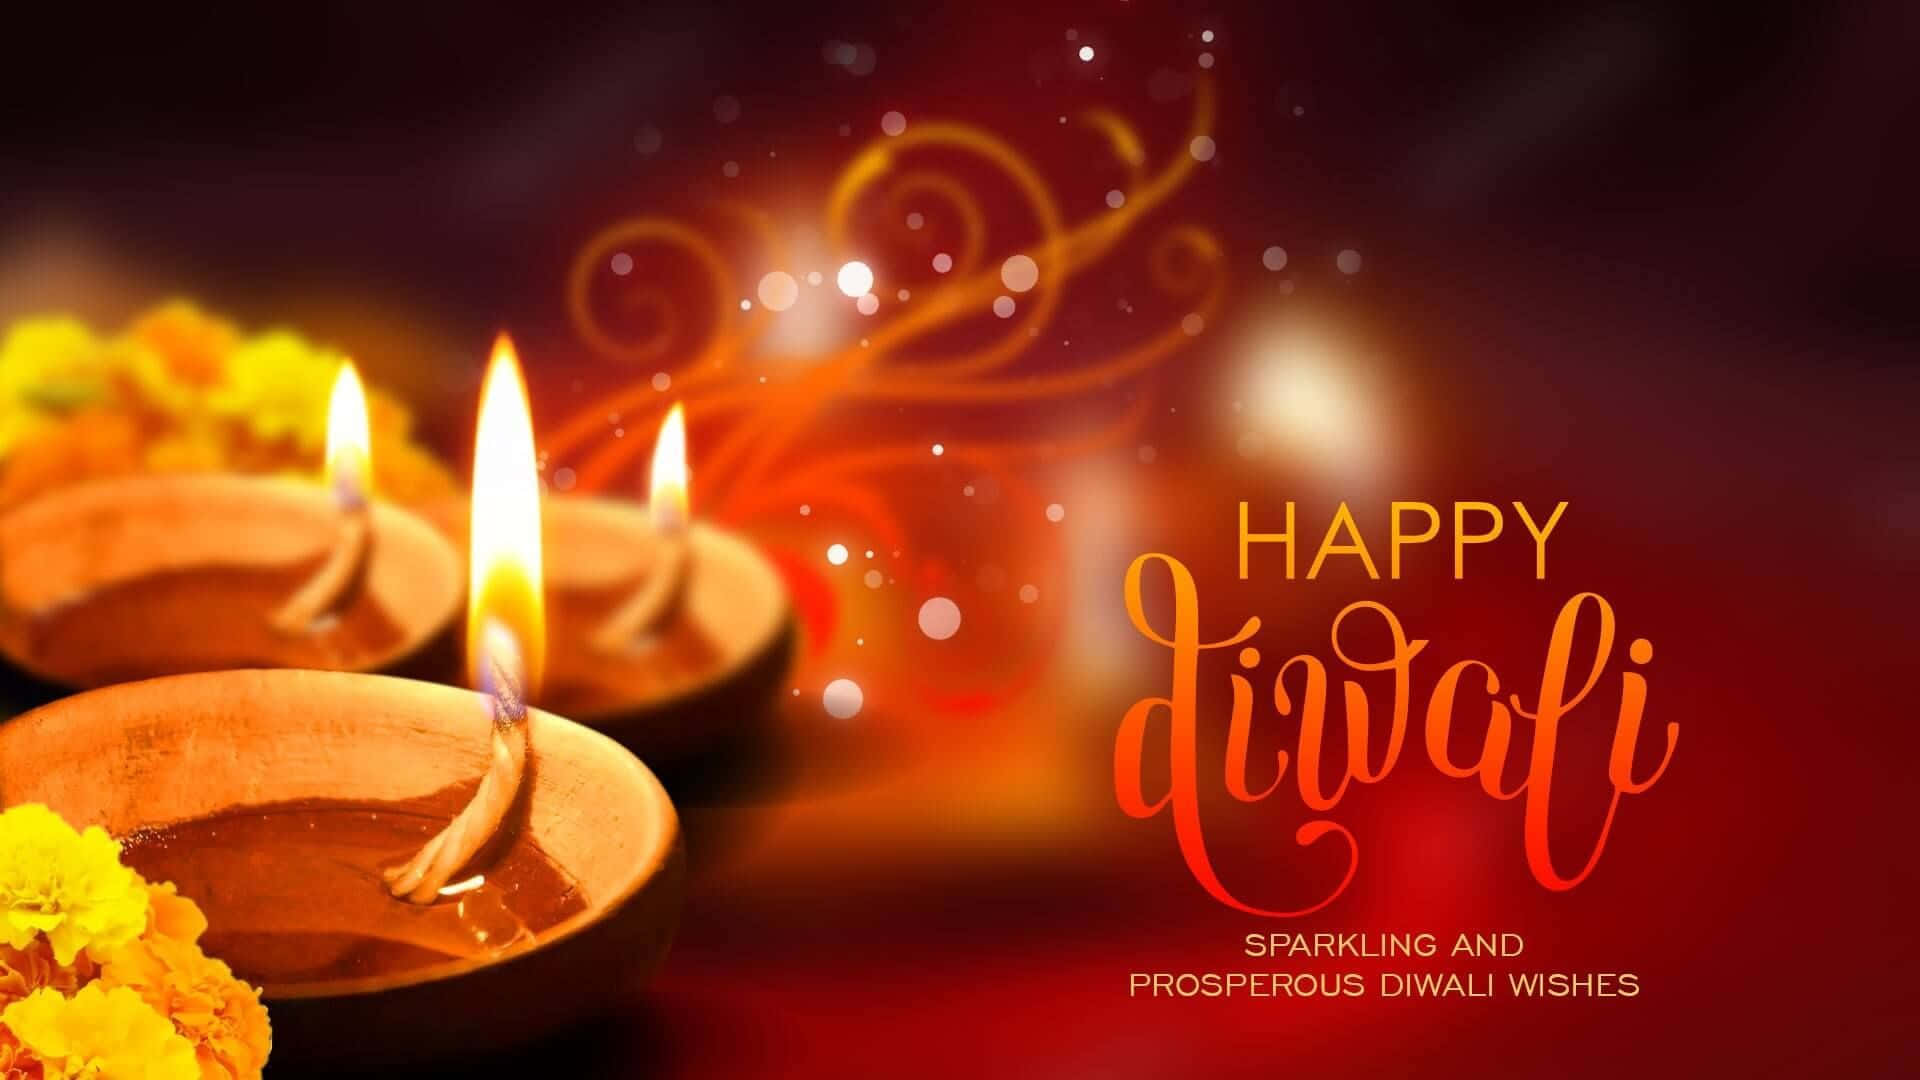 Wishing you a sparkling and prosperous Diwali!